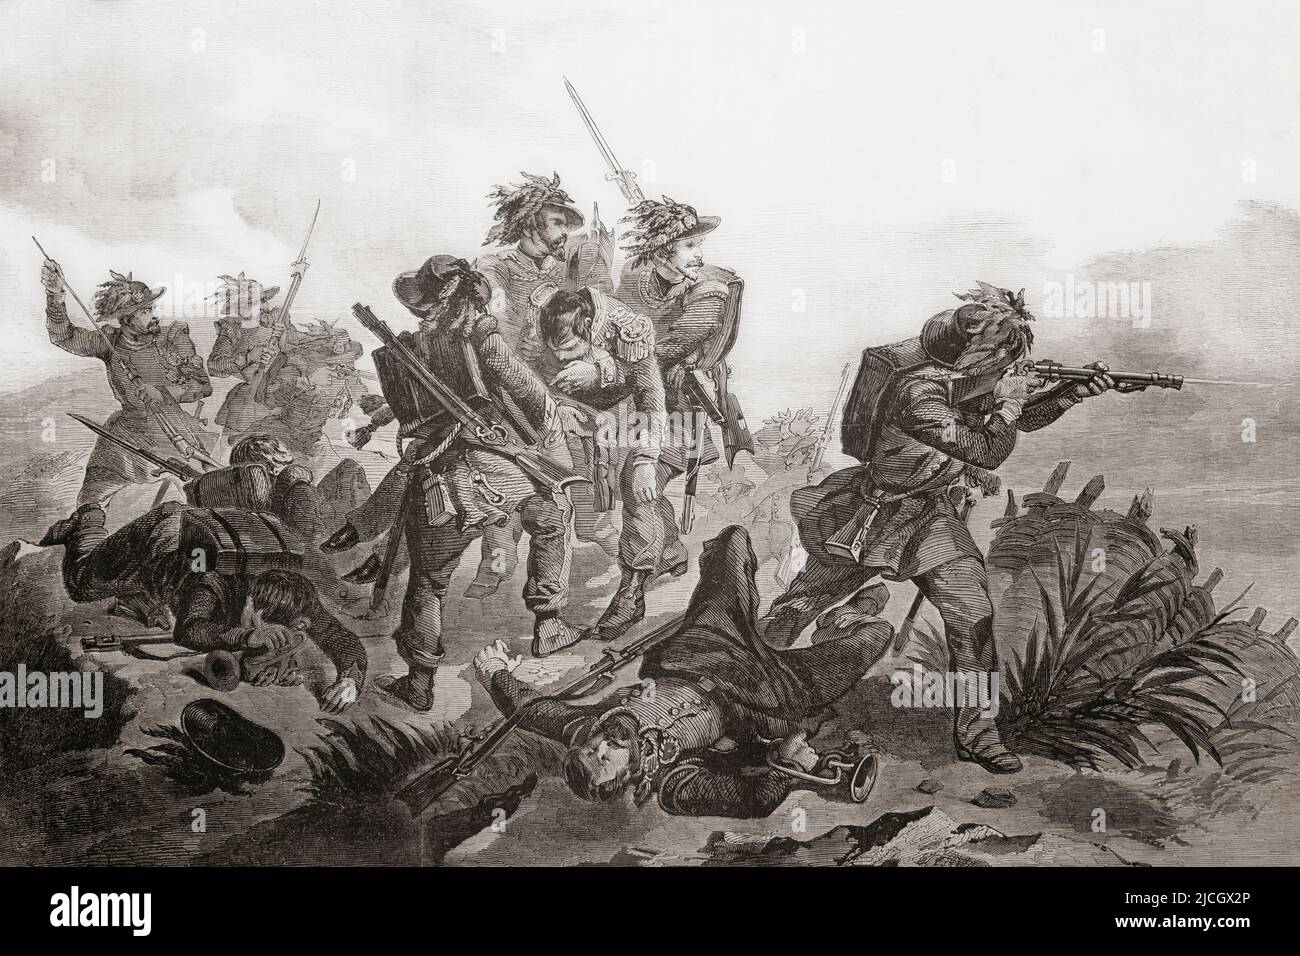 Soldiers from the 8th Bersaglieri Regiment fighting at the Battle of Magenta, 4 June 1859 during the Second Italian War of Independence.  From L'Univers Illustre, published Paris, 1859 Stock Photo